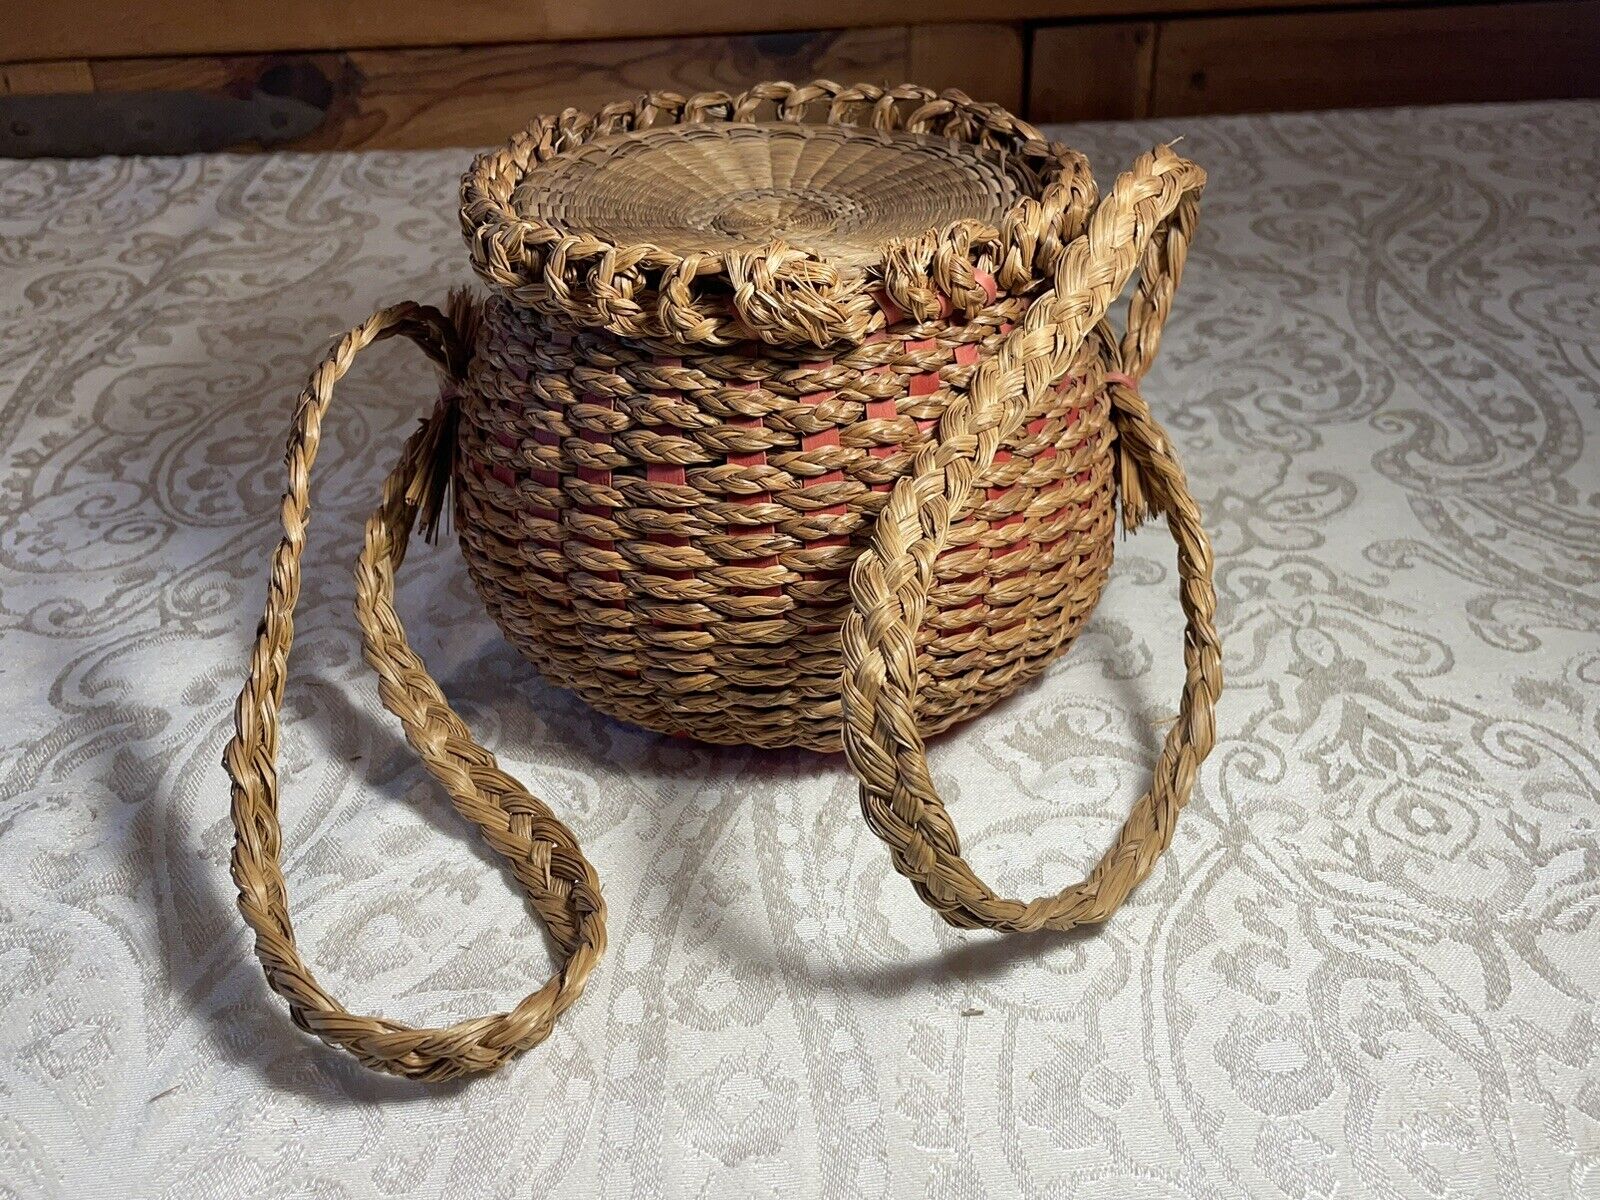 Two Braided Handles Vintage Native American Splint And Sweetgrass Basket